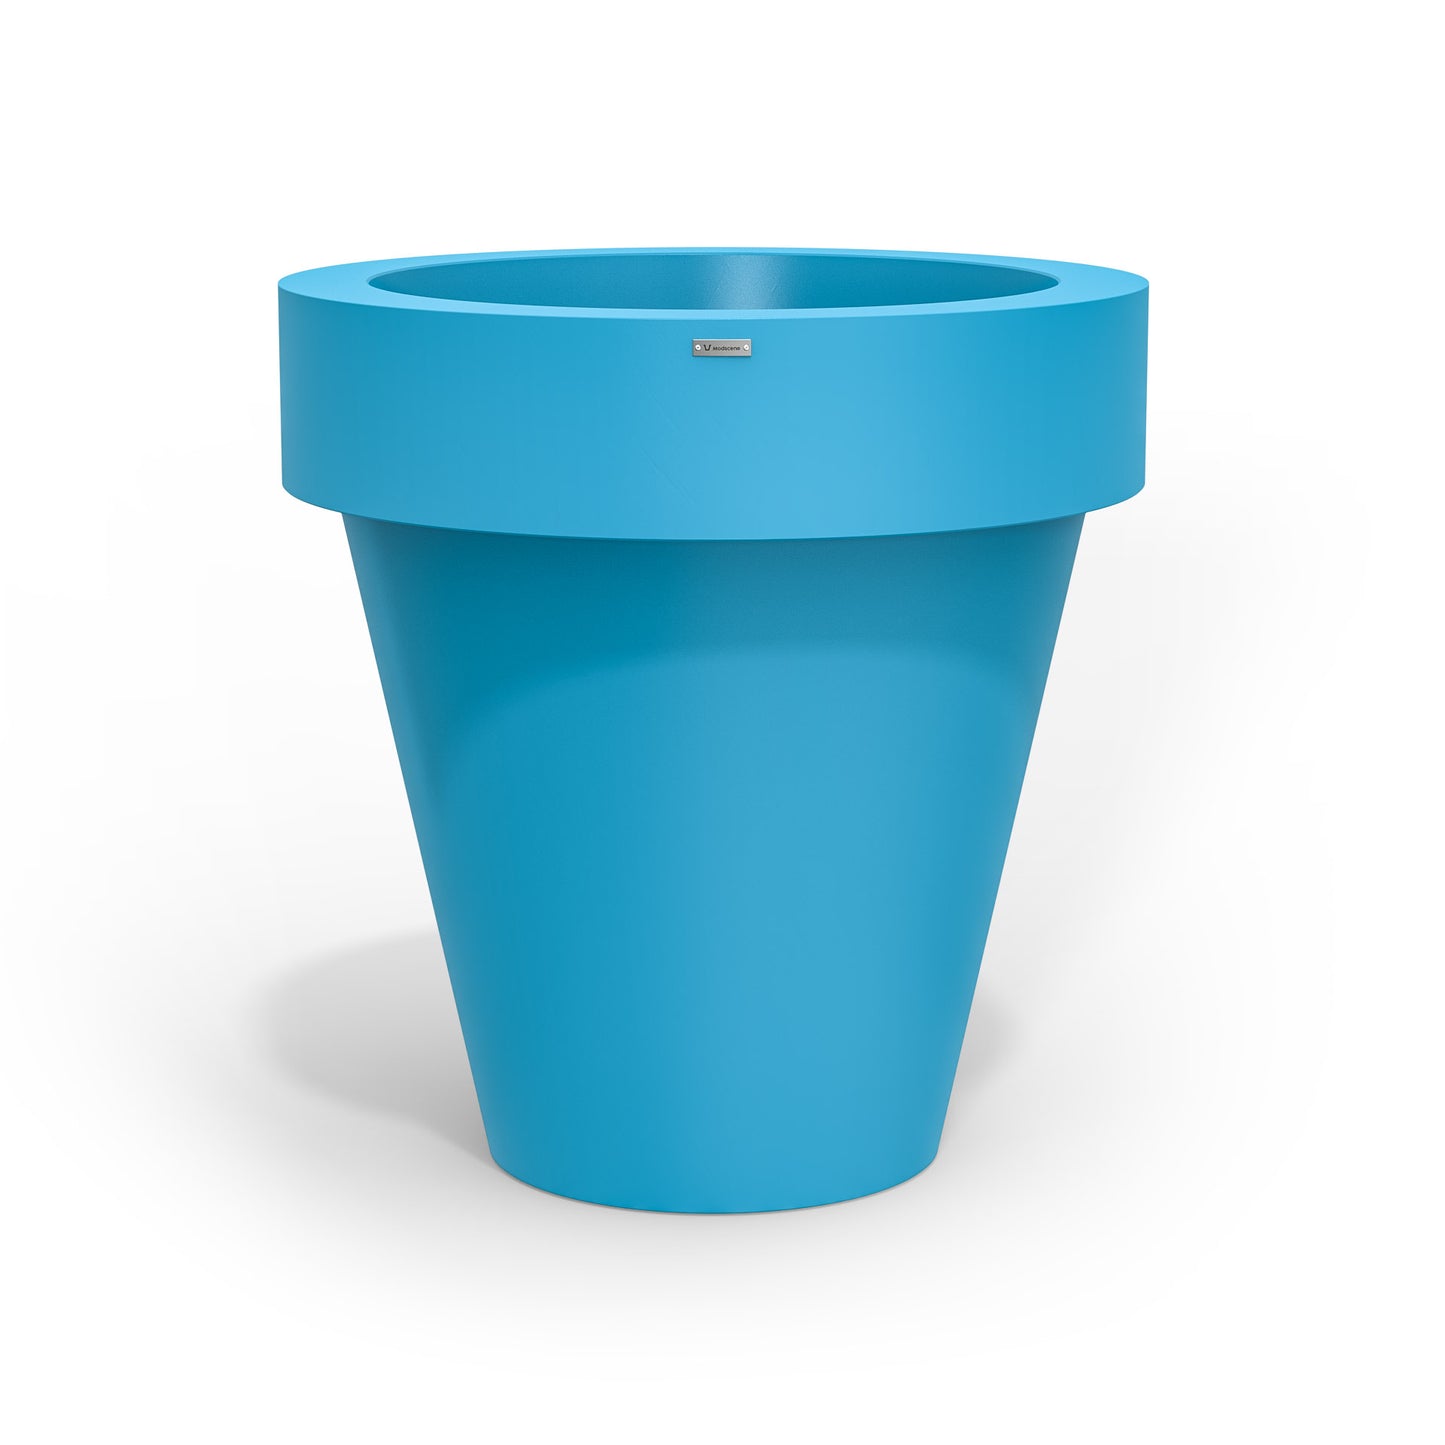 Extra large Modscene planter pot in a blue colour. NZ made.